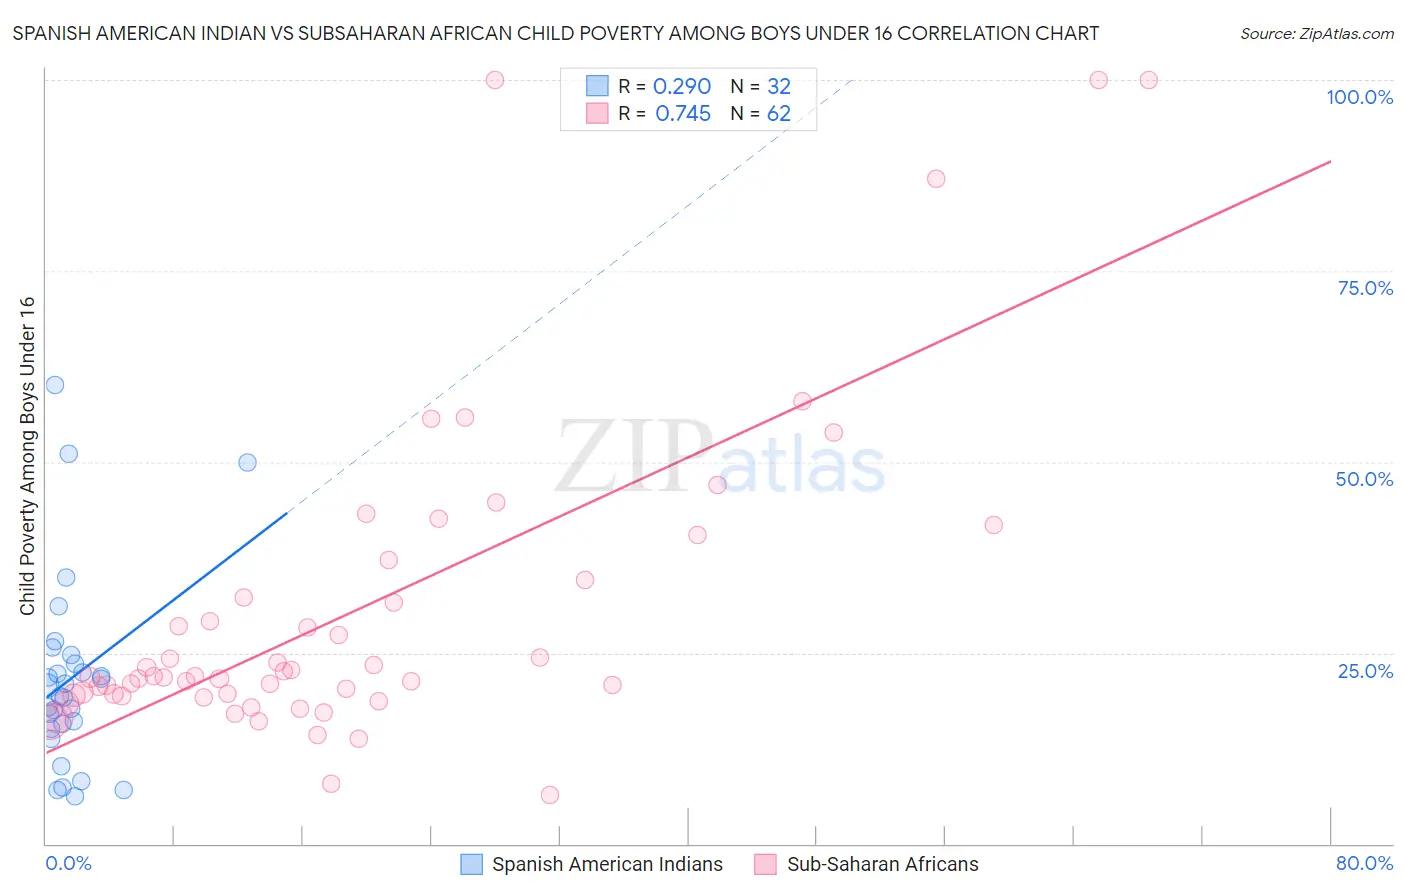 Spanish American Indian vs Subsaharan African Child Poverty Among Boys Under 16